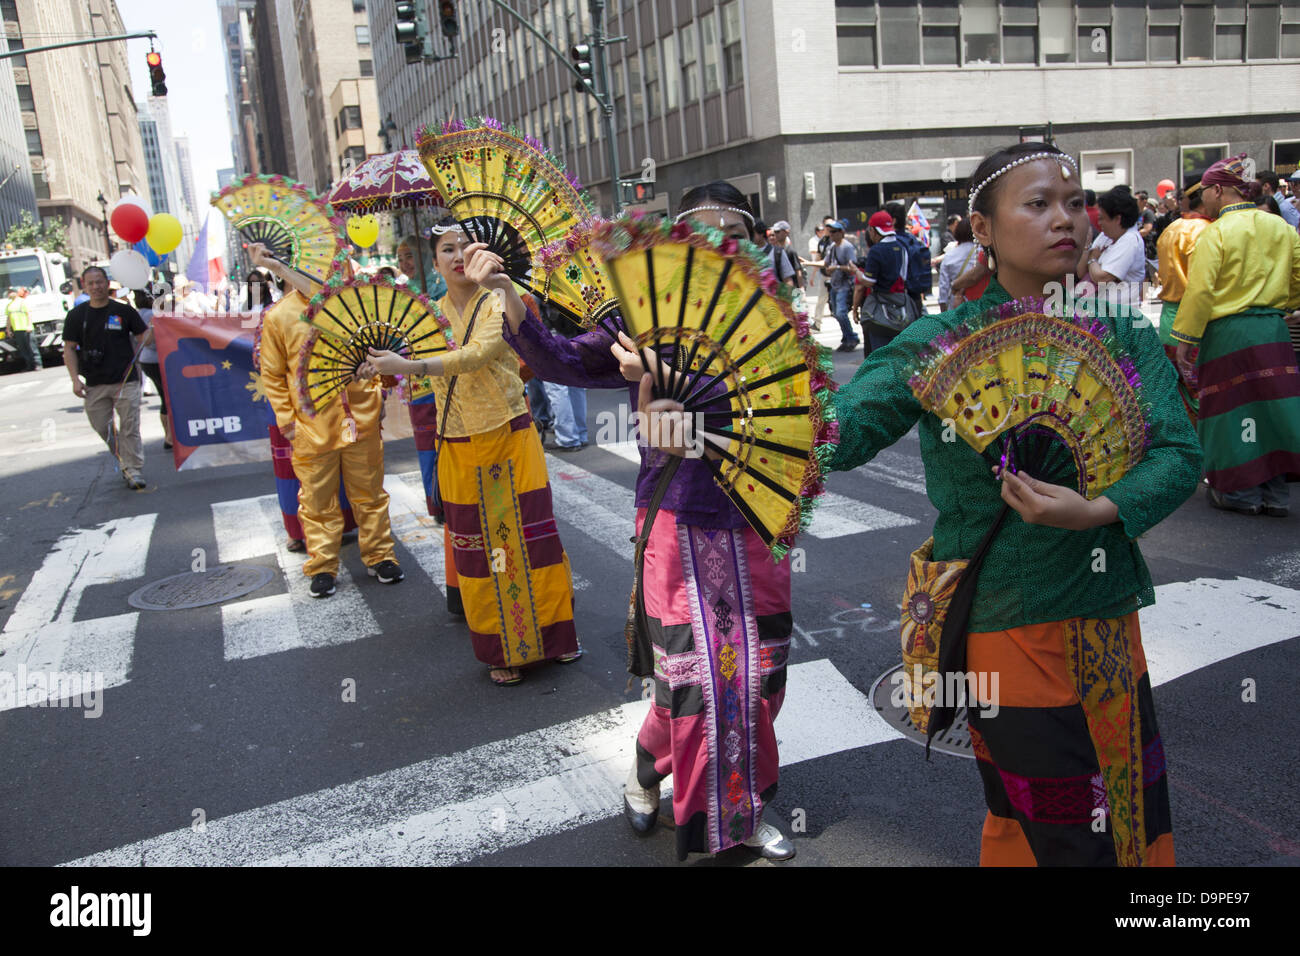 Women in colorful costumes perform & march in the Filipino Parade on Madison Ave. in NYC Stock Photo